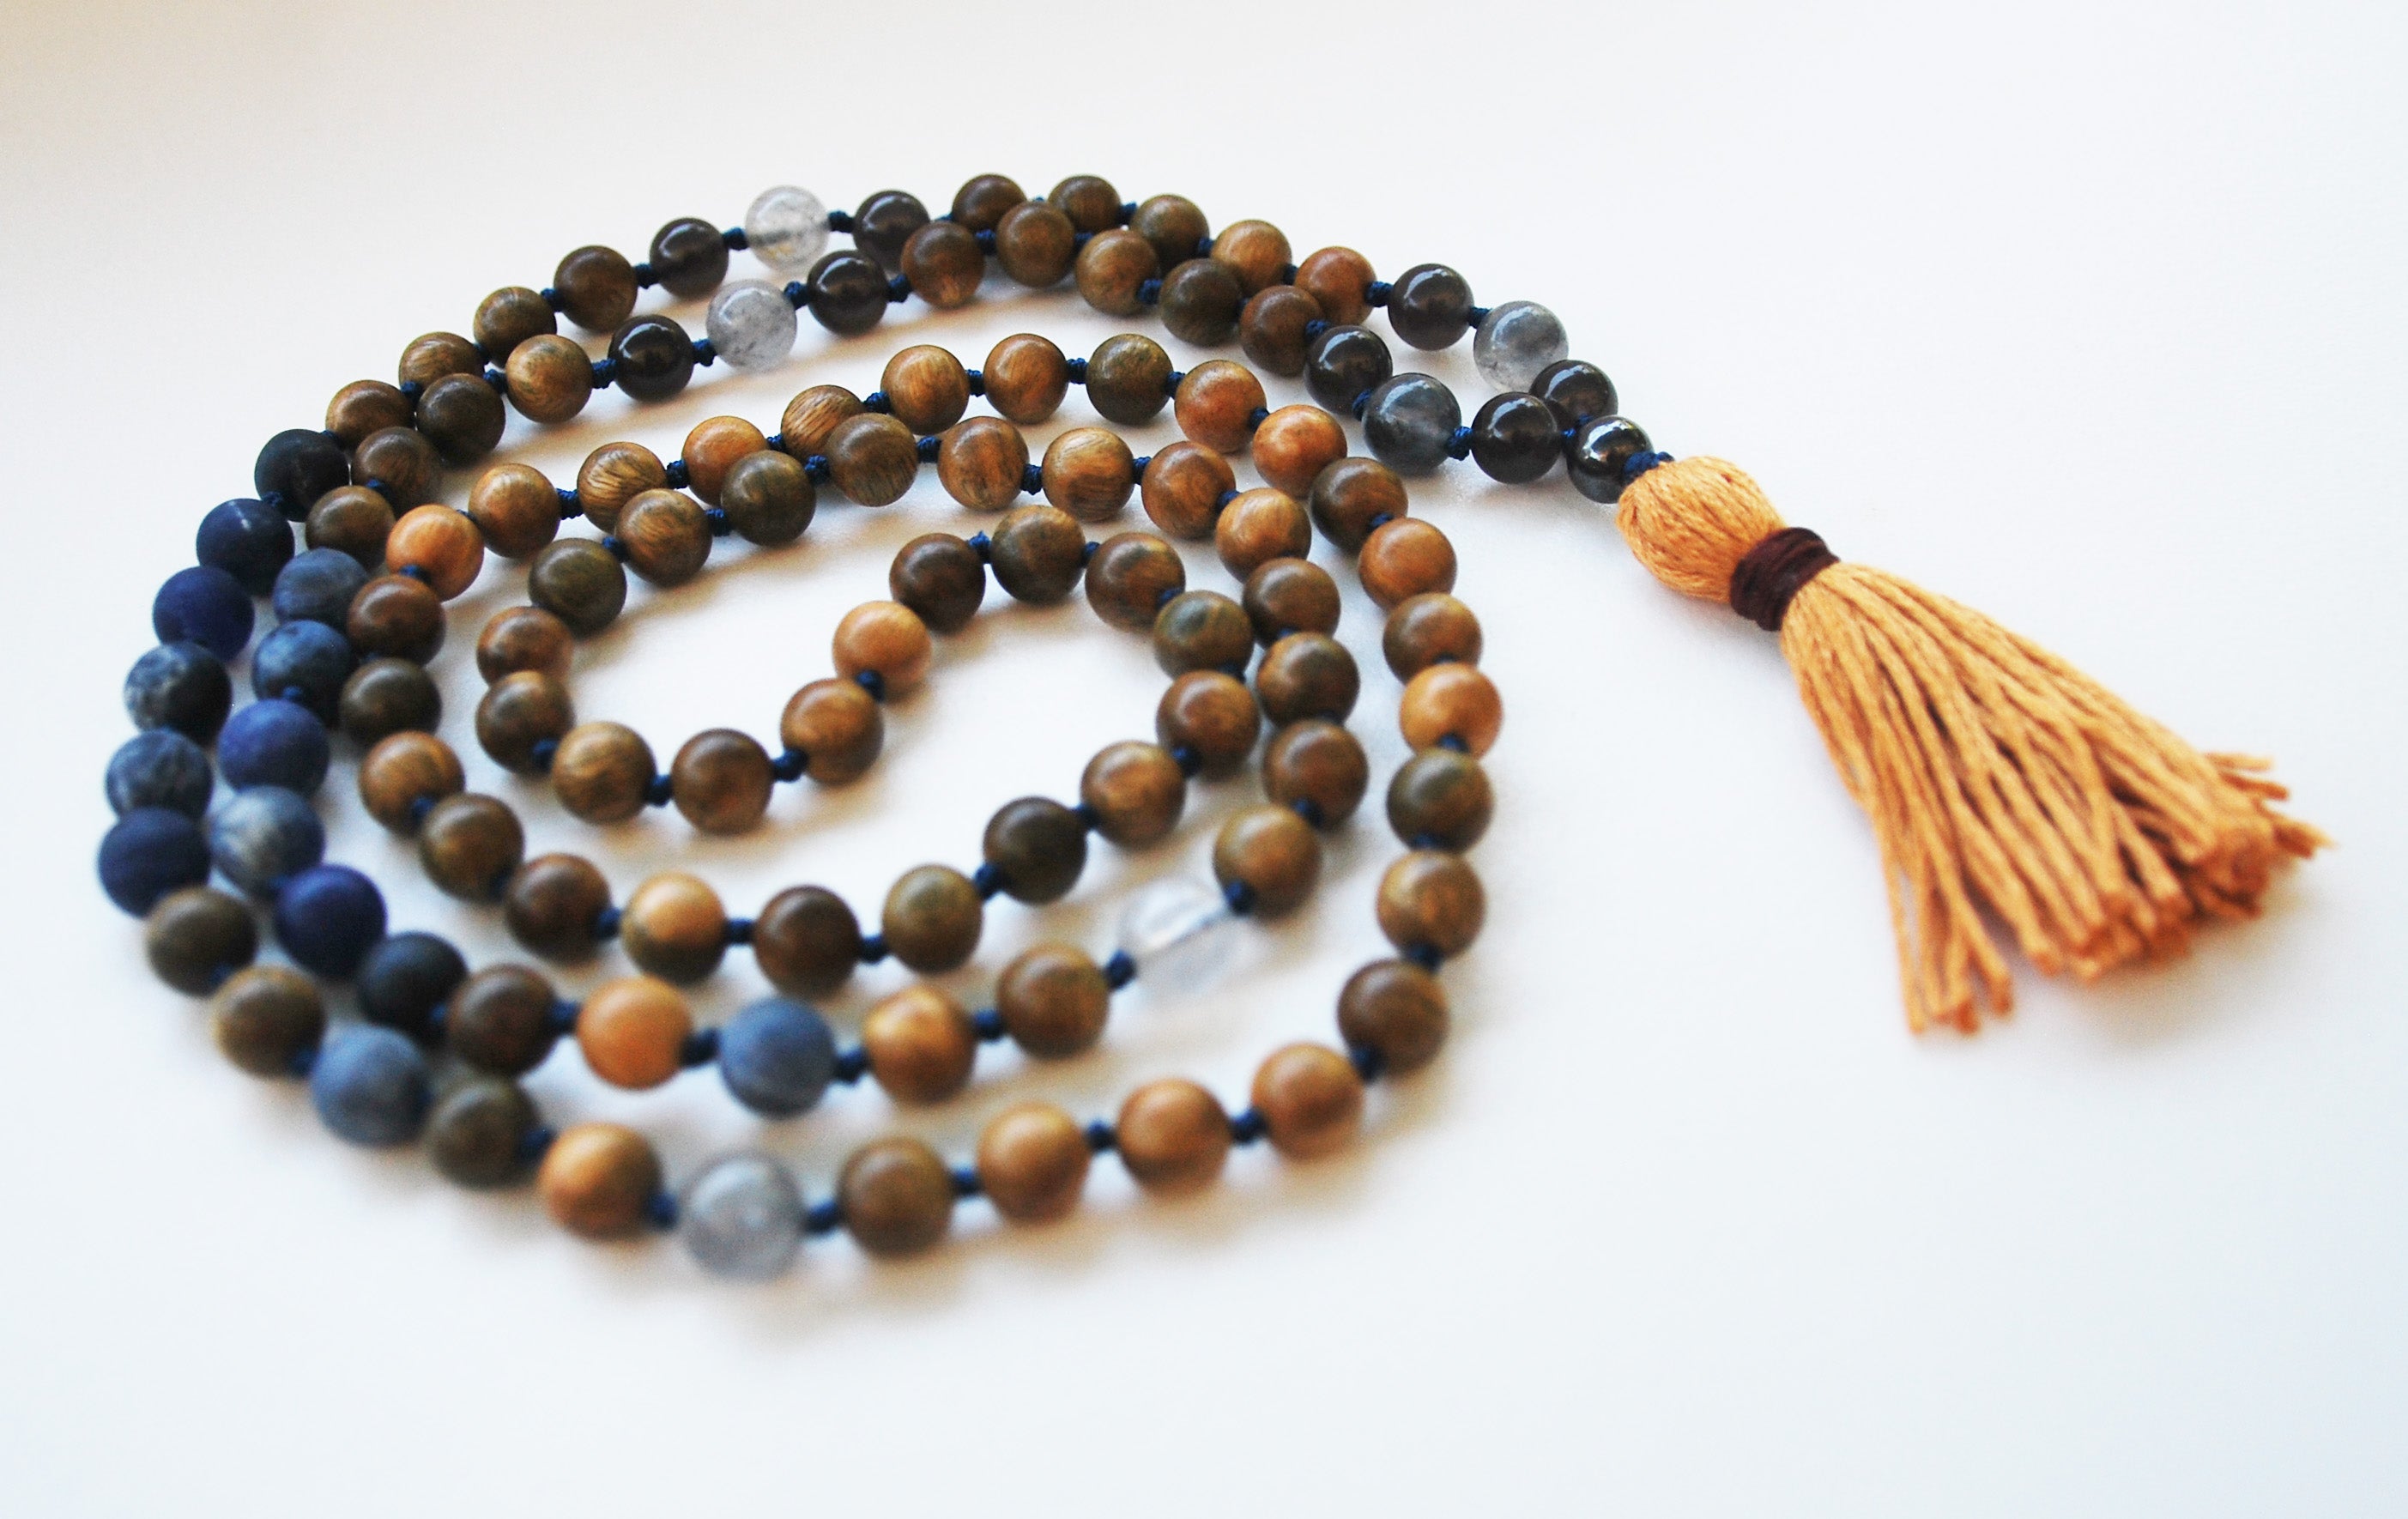 8mm Green Sandalwood & Matte Sodalite 108 Knotted Mala Necklace with Cotton Tassel